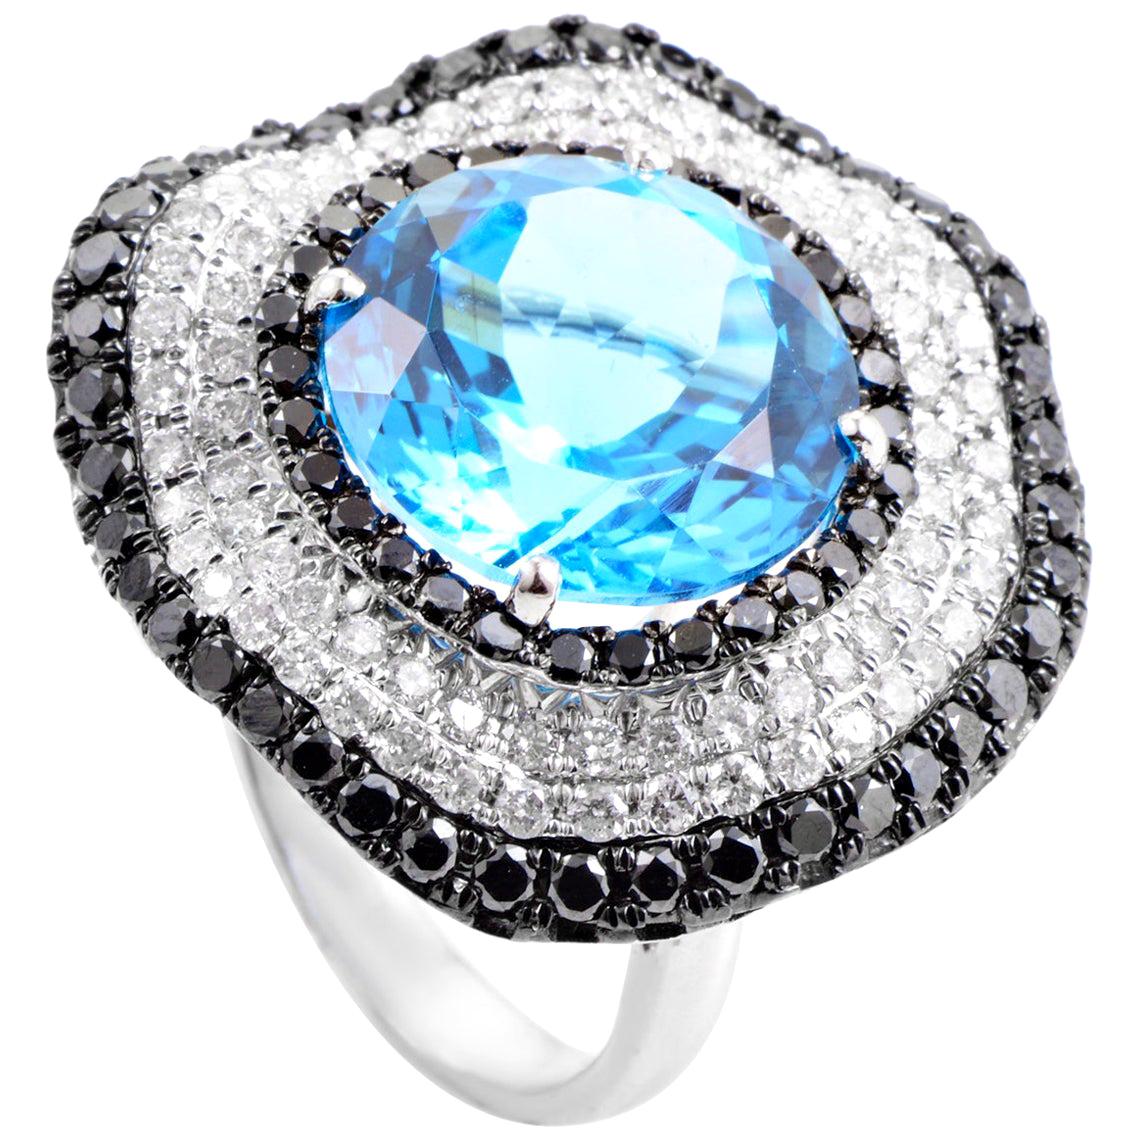 French Collection 18 Karat White Gold Diamond and Topaz Ring